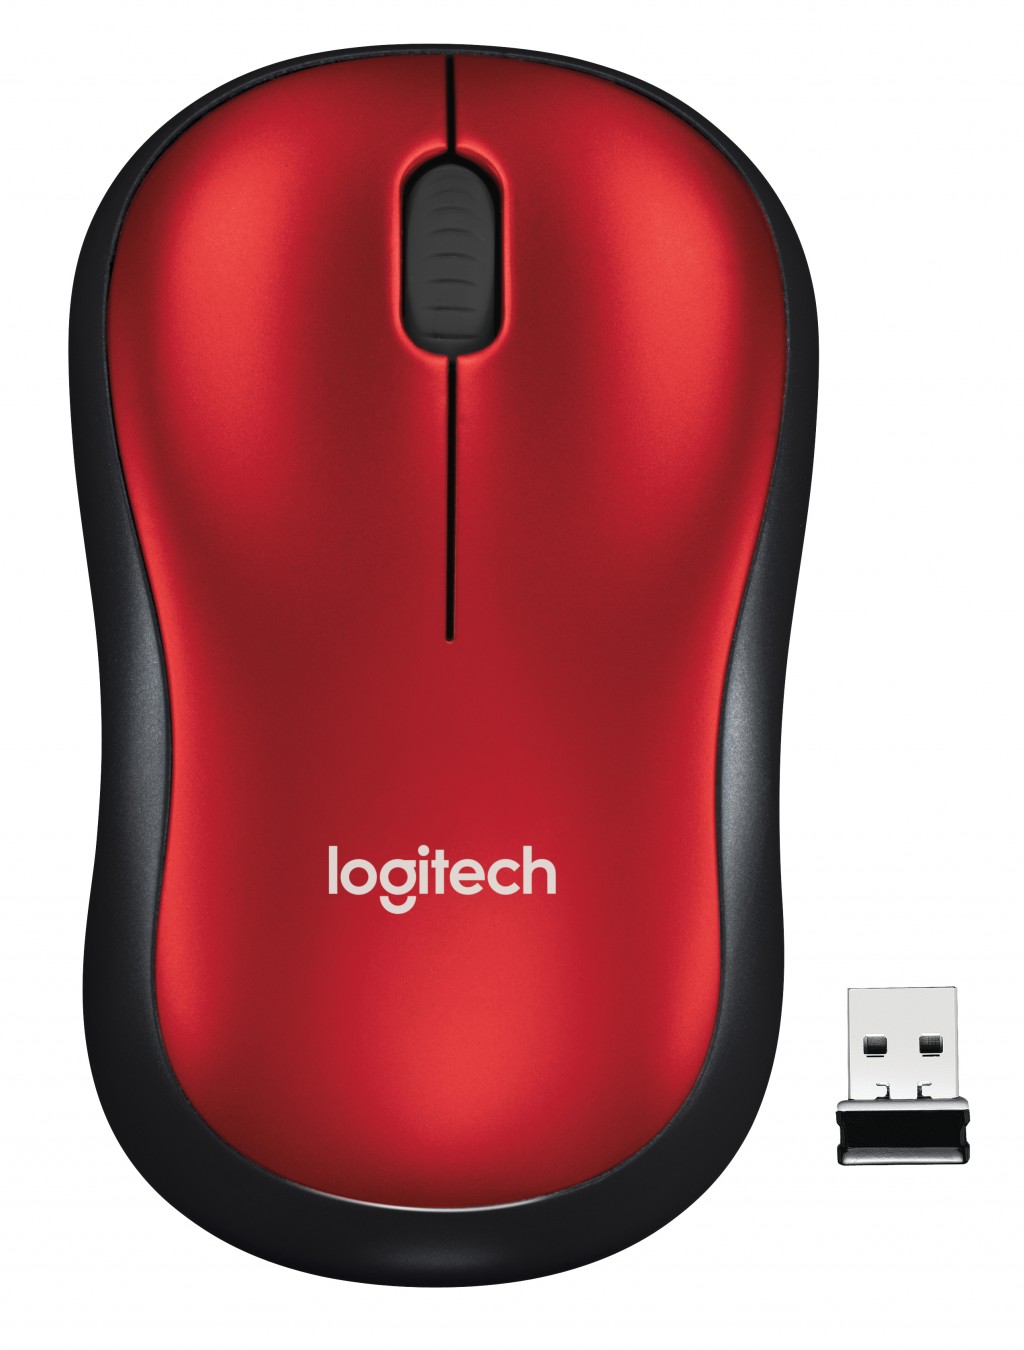 Logitech | Mouse | M185 | Wireless | Red